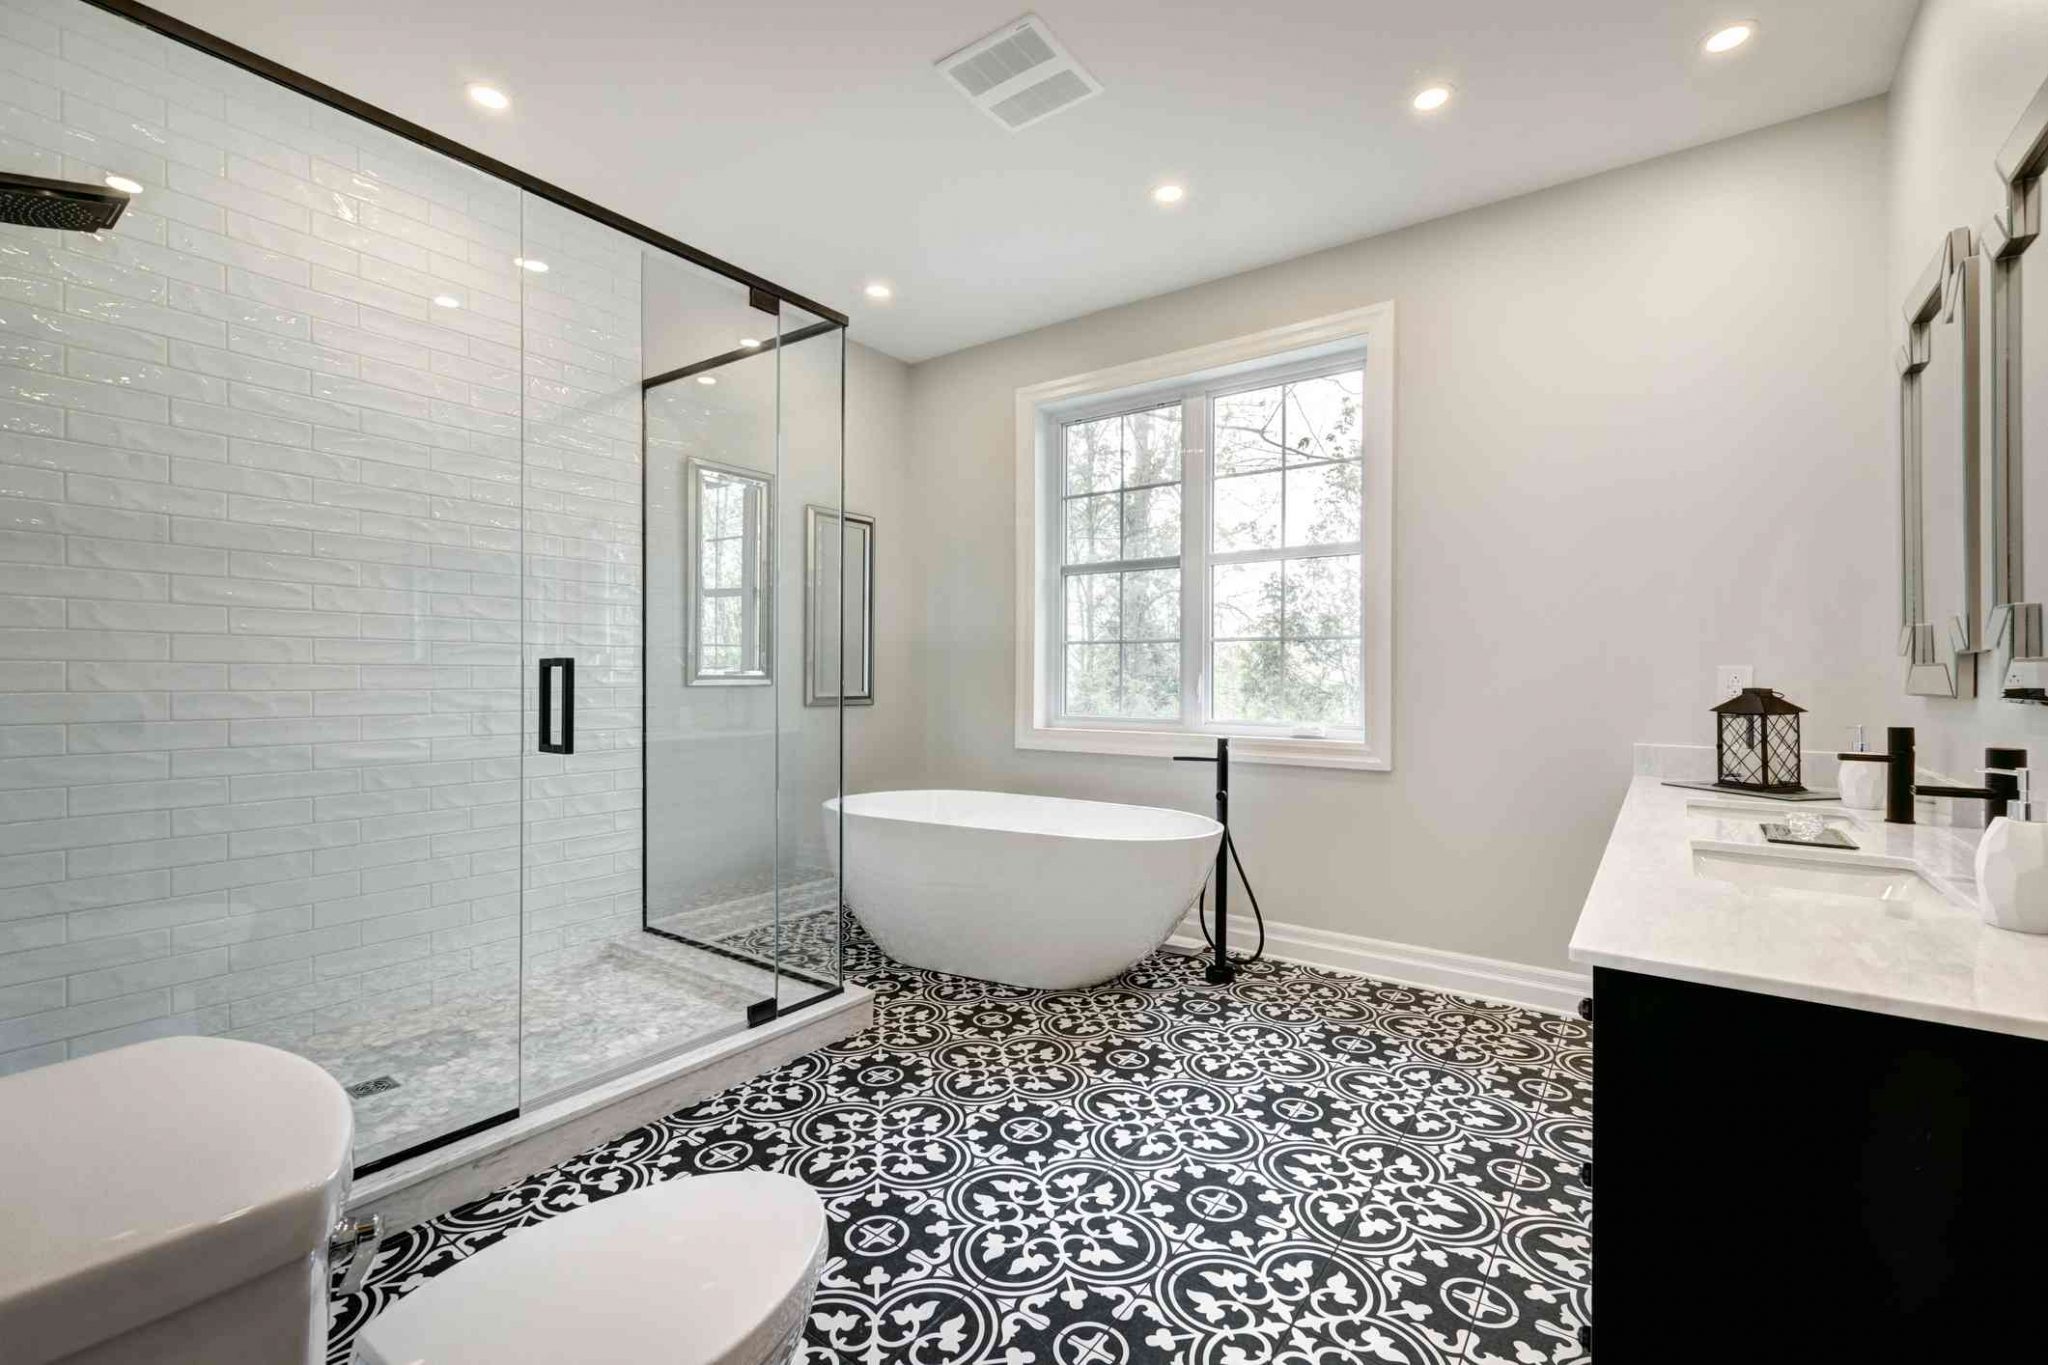 How to Cut Costs by Remodeling Your Bathroom?